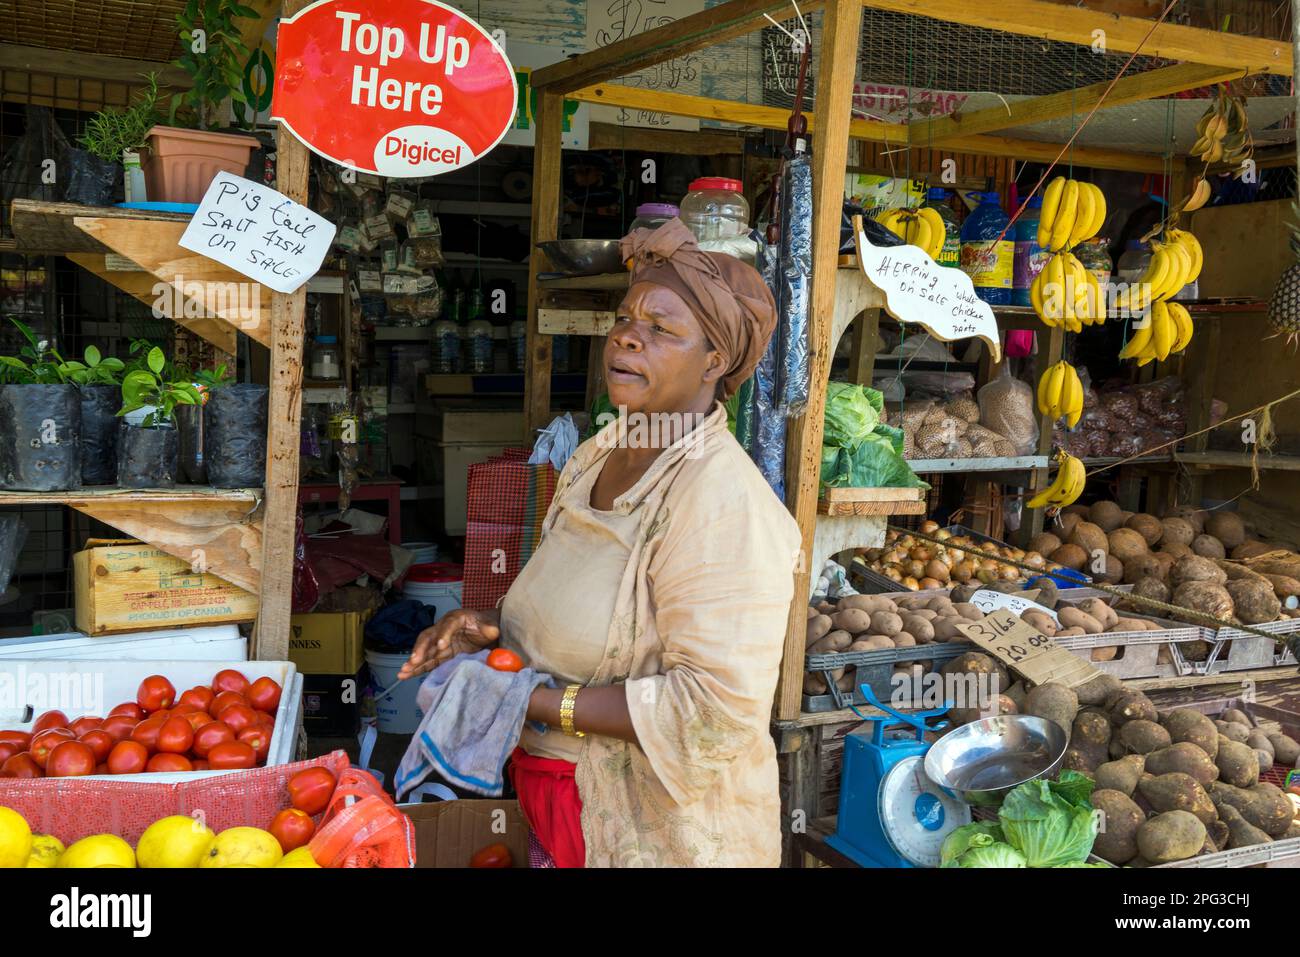 Fruit and Vegetable Stand Scarborough, Tobago,Republic of Trinidad and Tobago, Southern Caribbean Stock Photo